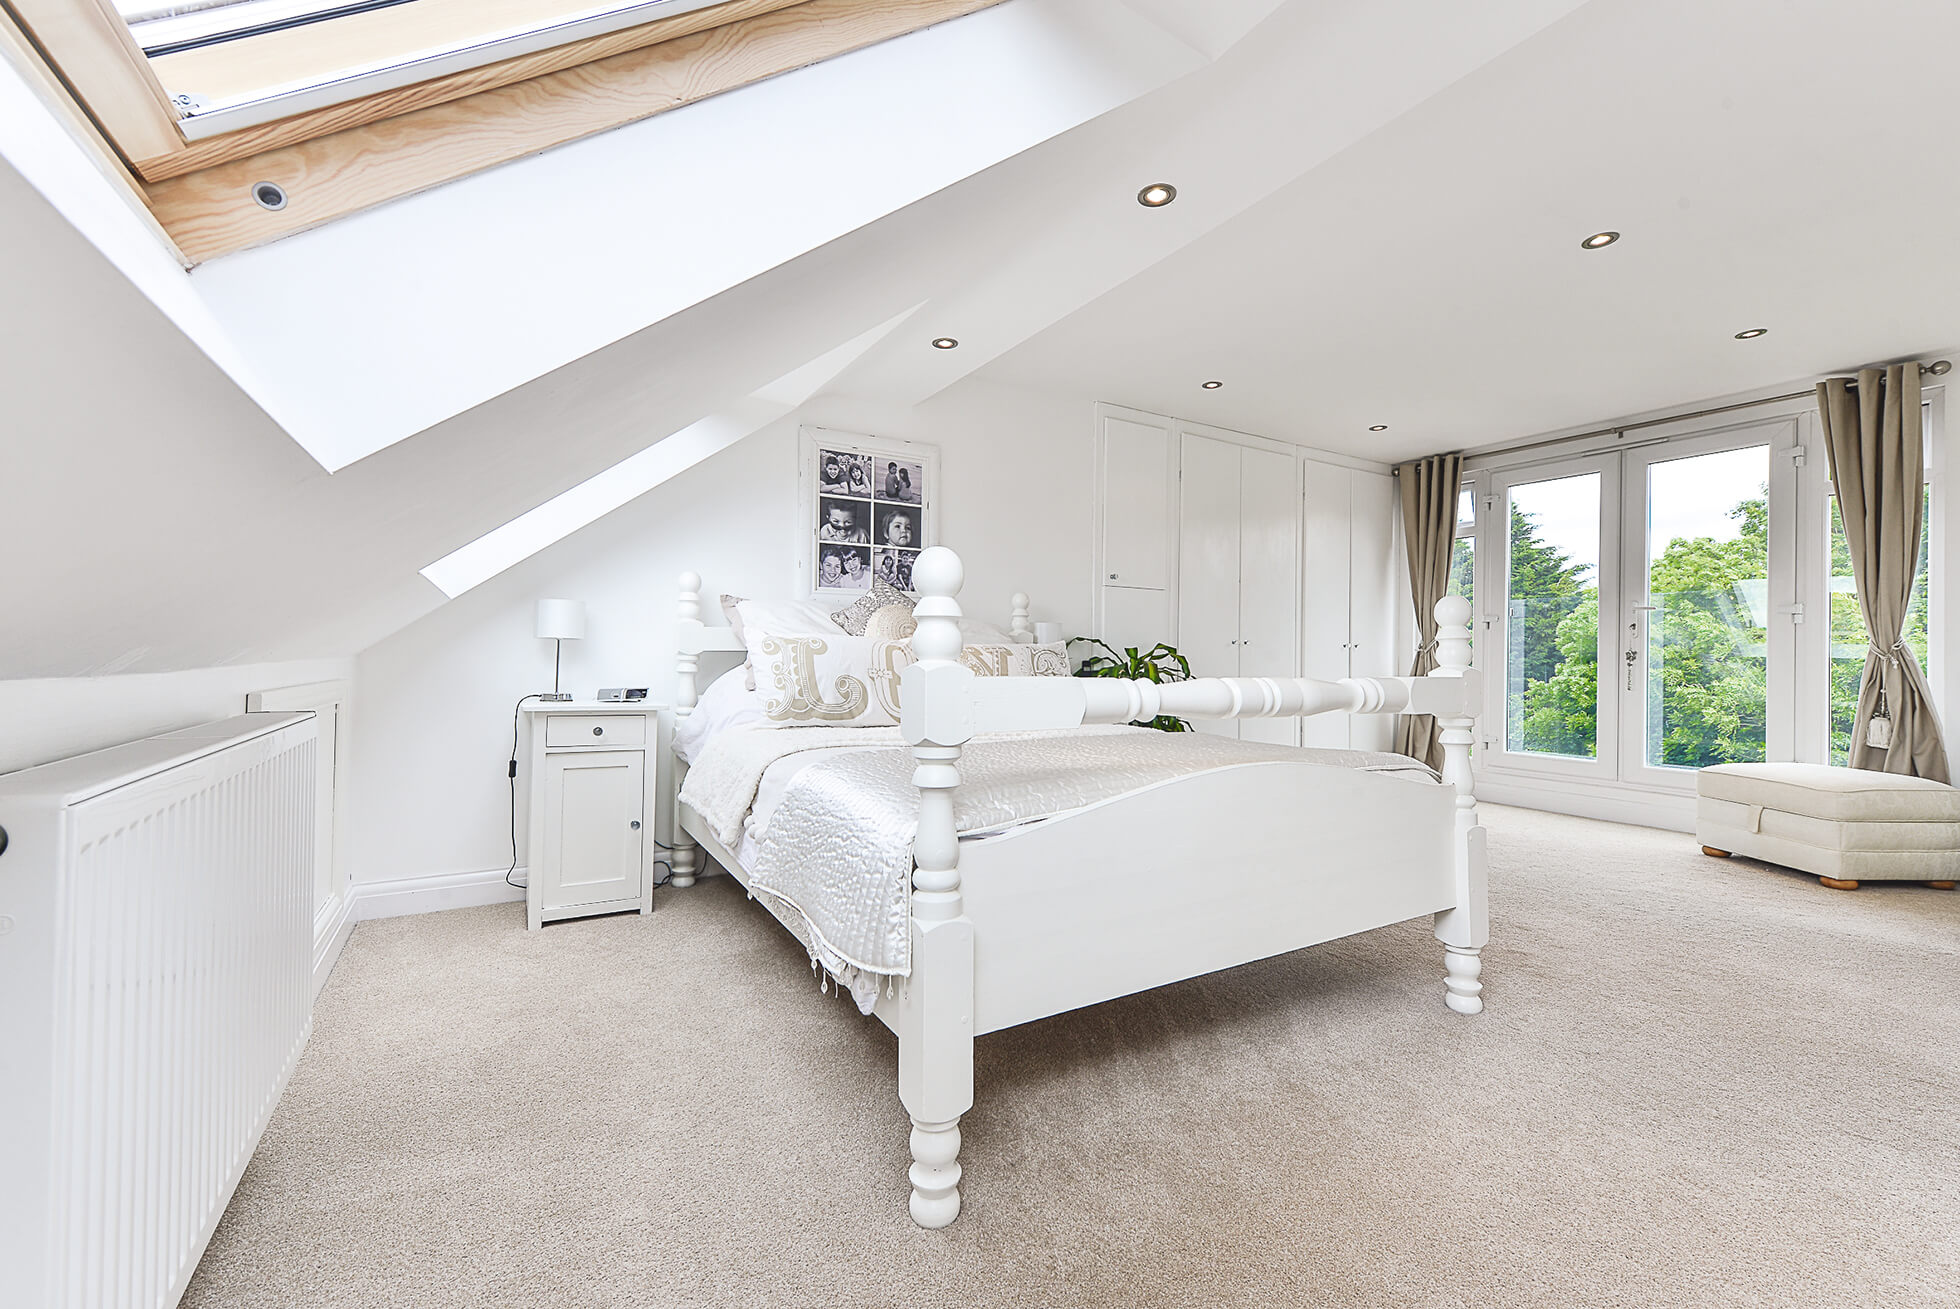 Do you have a question about converting your Loft in Leverstock Green? Here are the most popular questions asked by our clients.